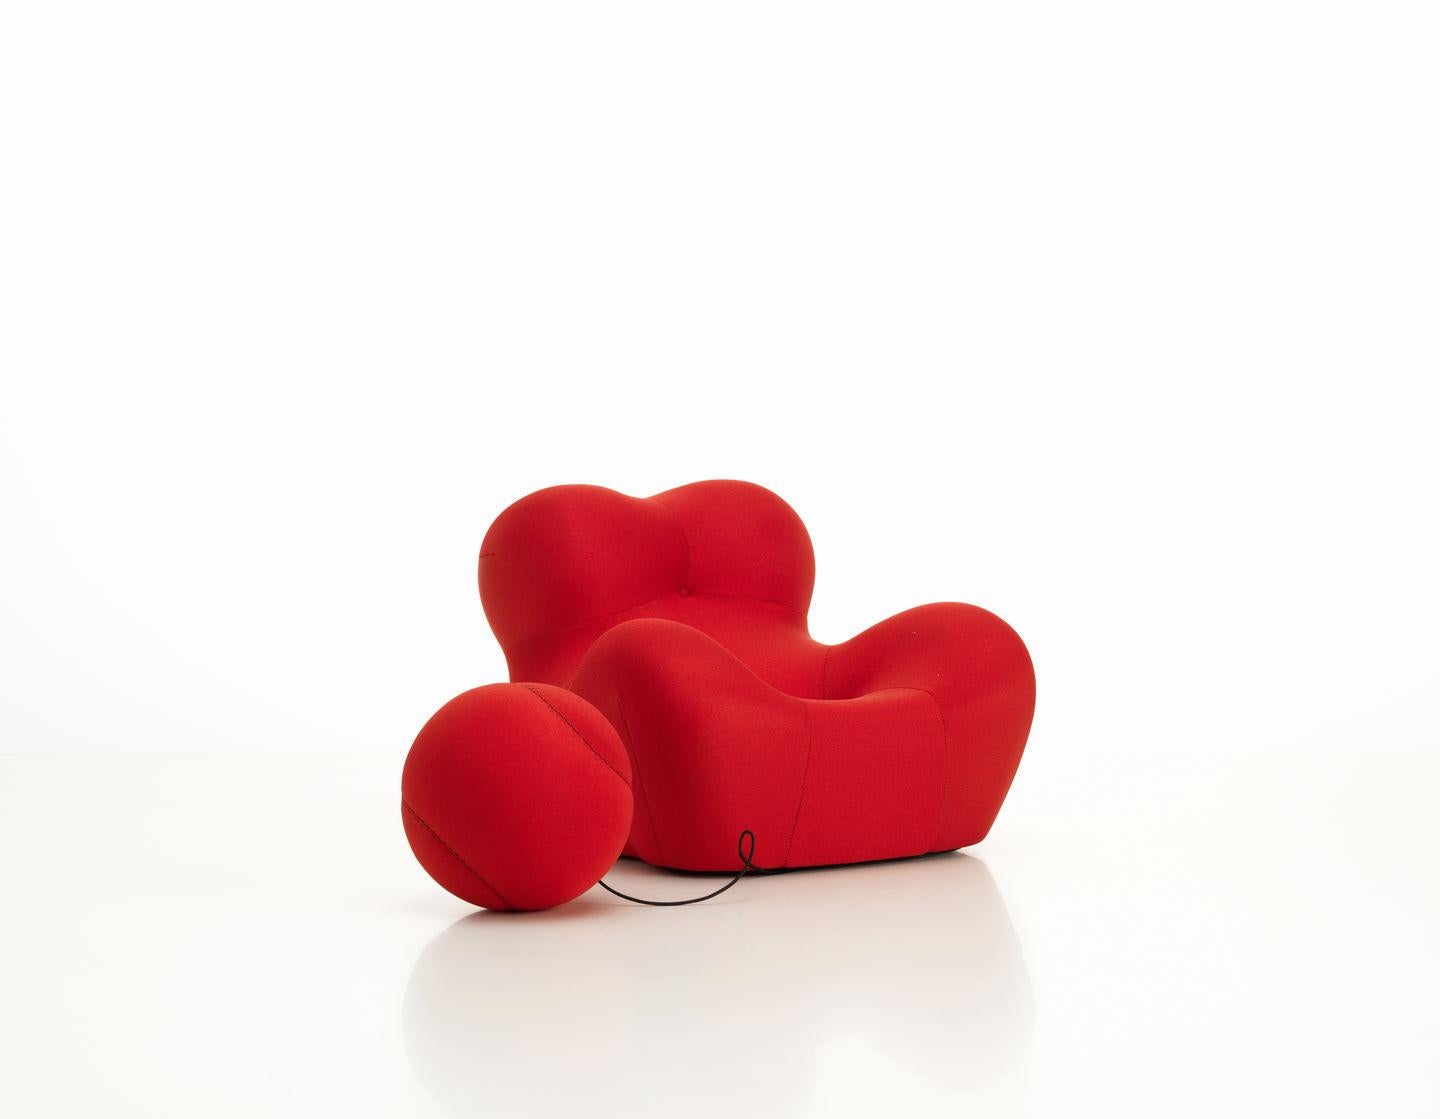 These items are only available in the United States.

La Mamma (Donna) is completely in tune with the spirit of Pop Art and the Gaetano Pasce fondness for anthropomorphic shapes. The chair was actually designed to resemble a prehistoric, female